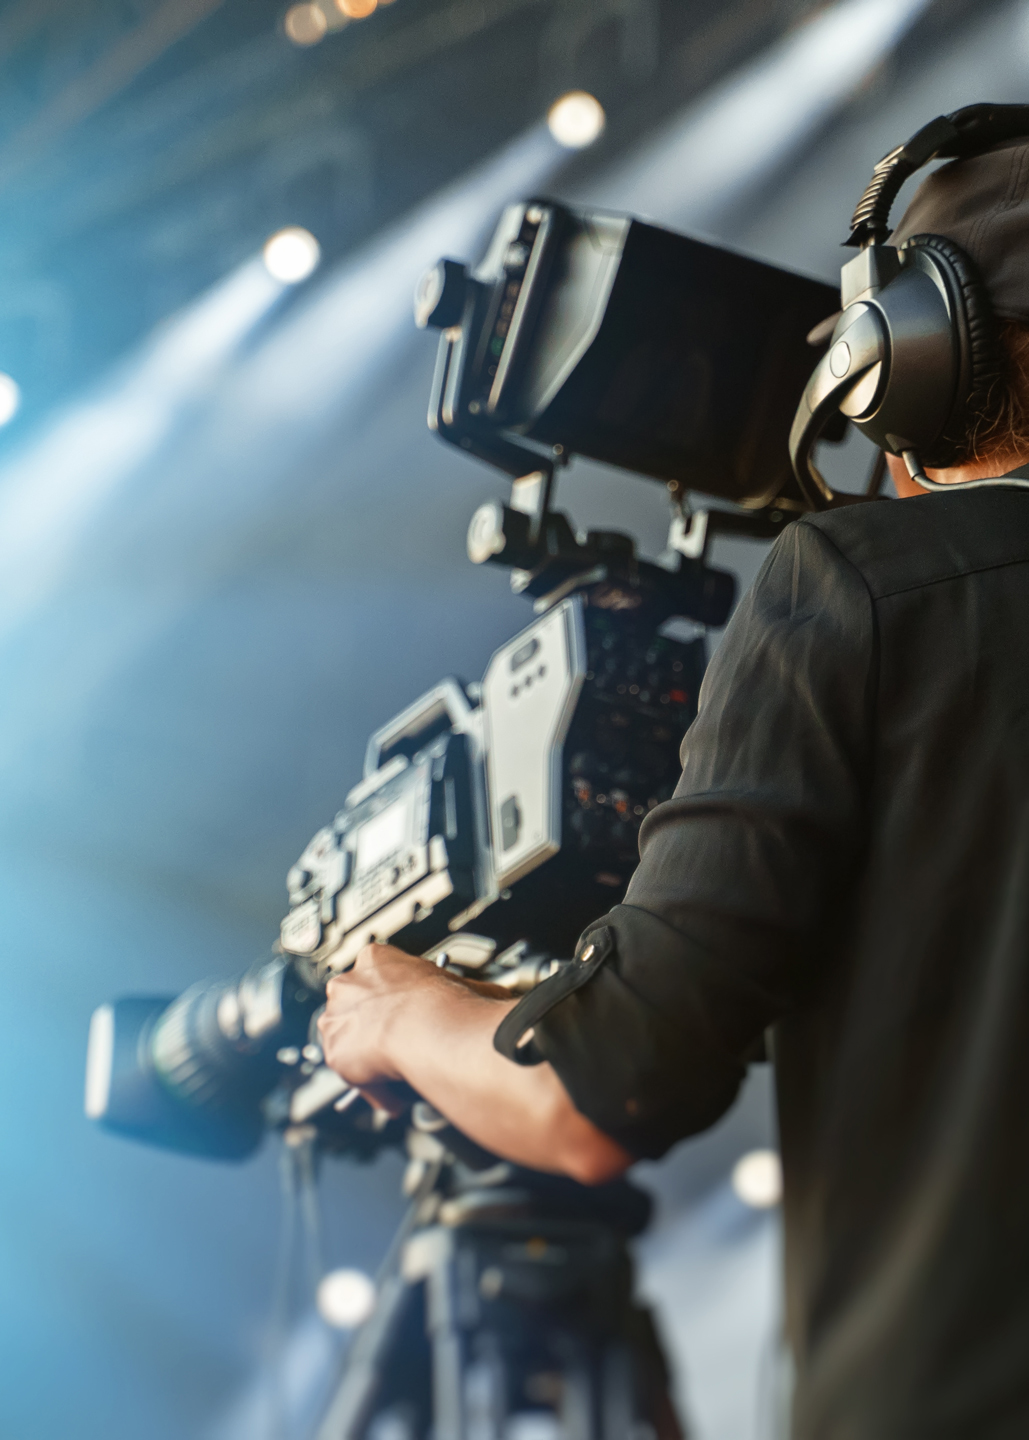 A close up image of a camera operator operating a large camera and wearing headphones.